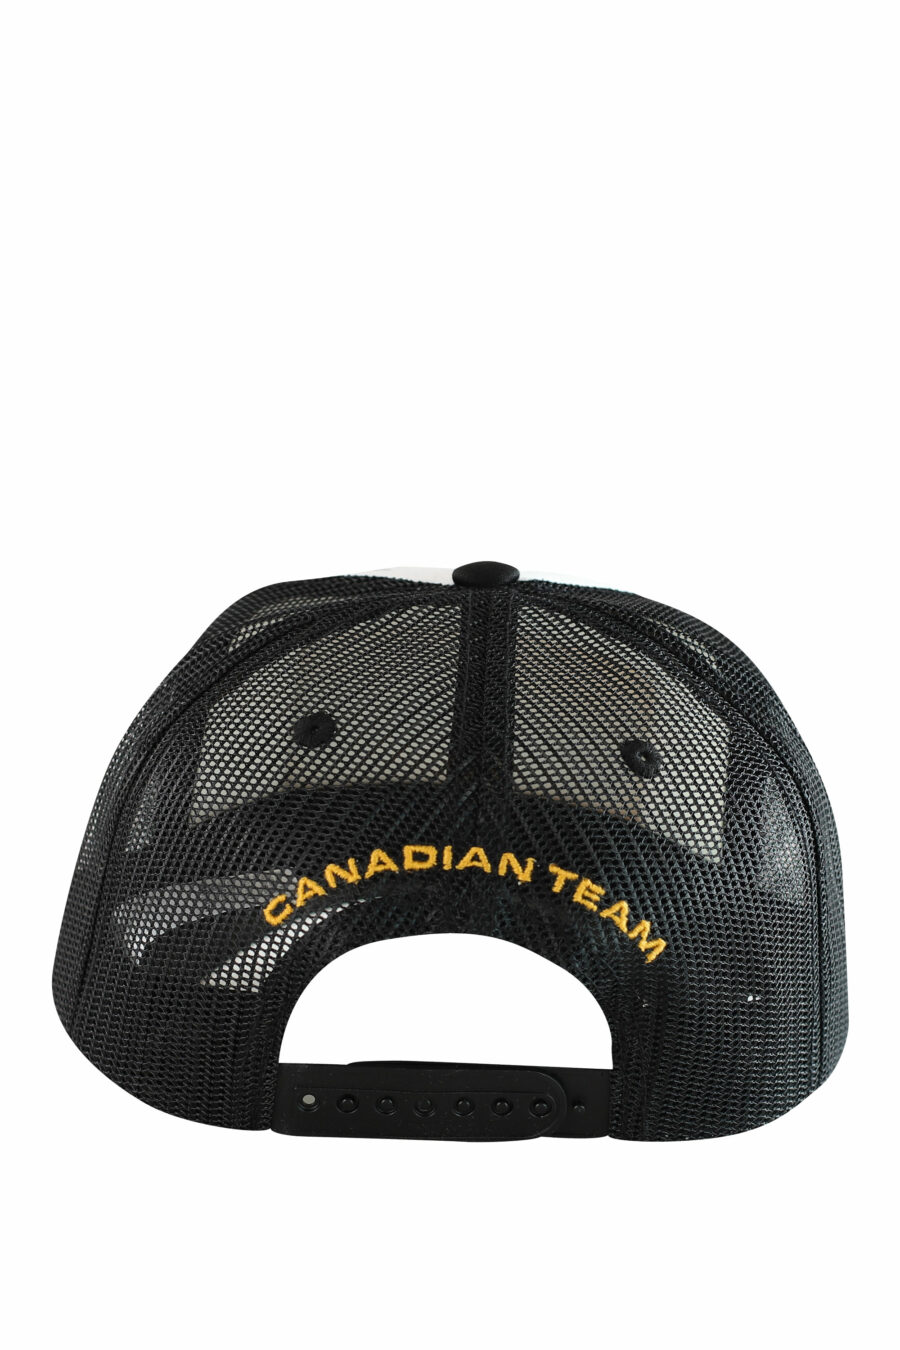 Bicolour black and white square and mesh cap with yellow logo detail - IMG 1220